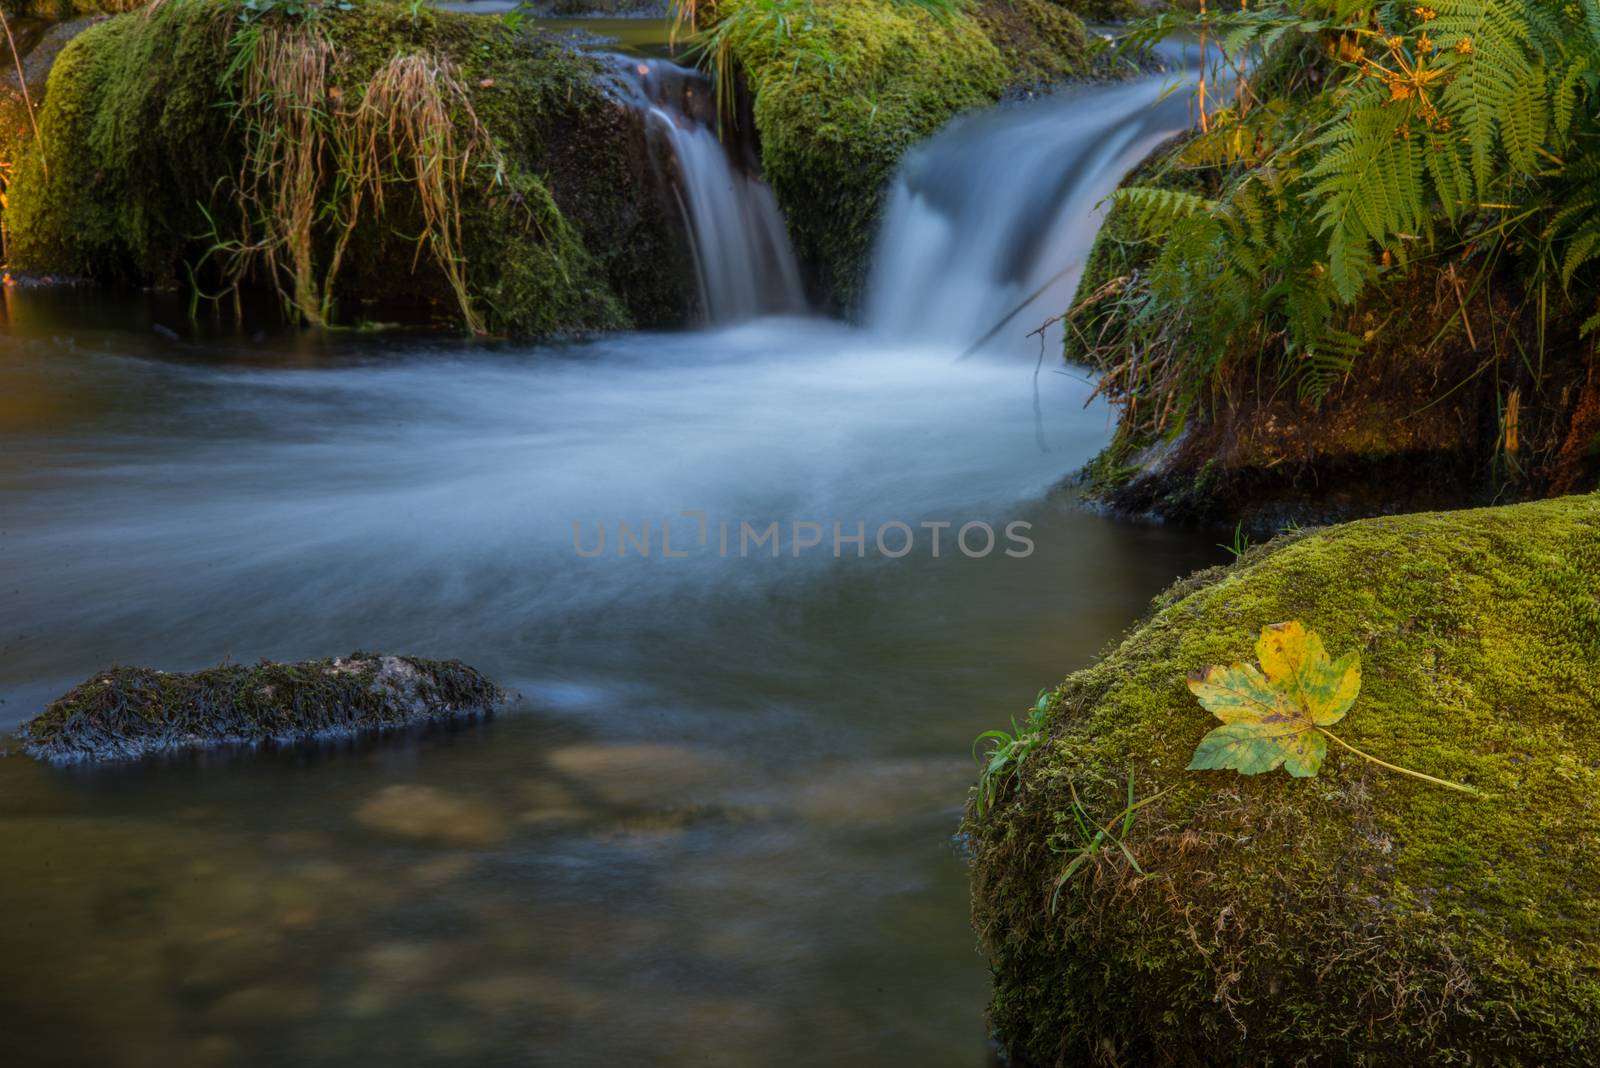 Fall leaf on moss stone over motion blur stream or river in autumn forest